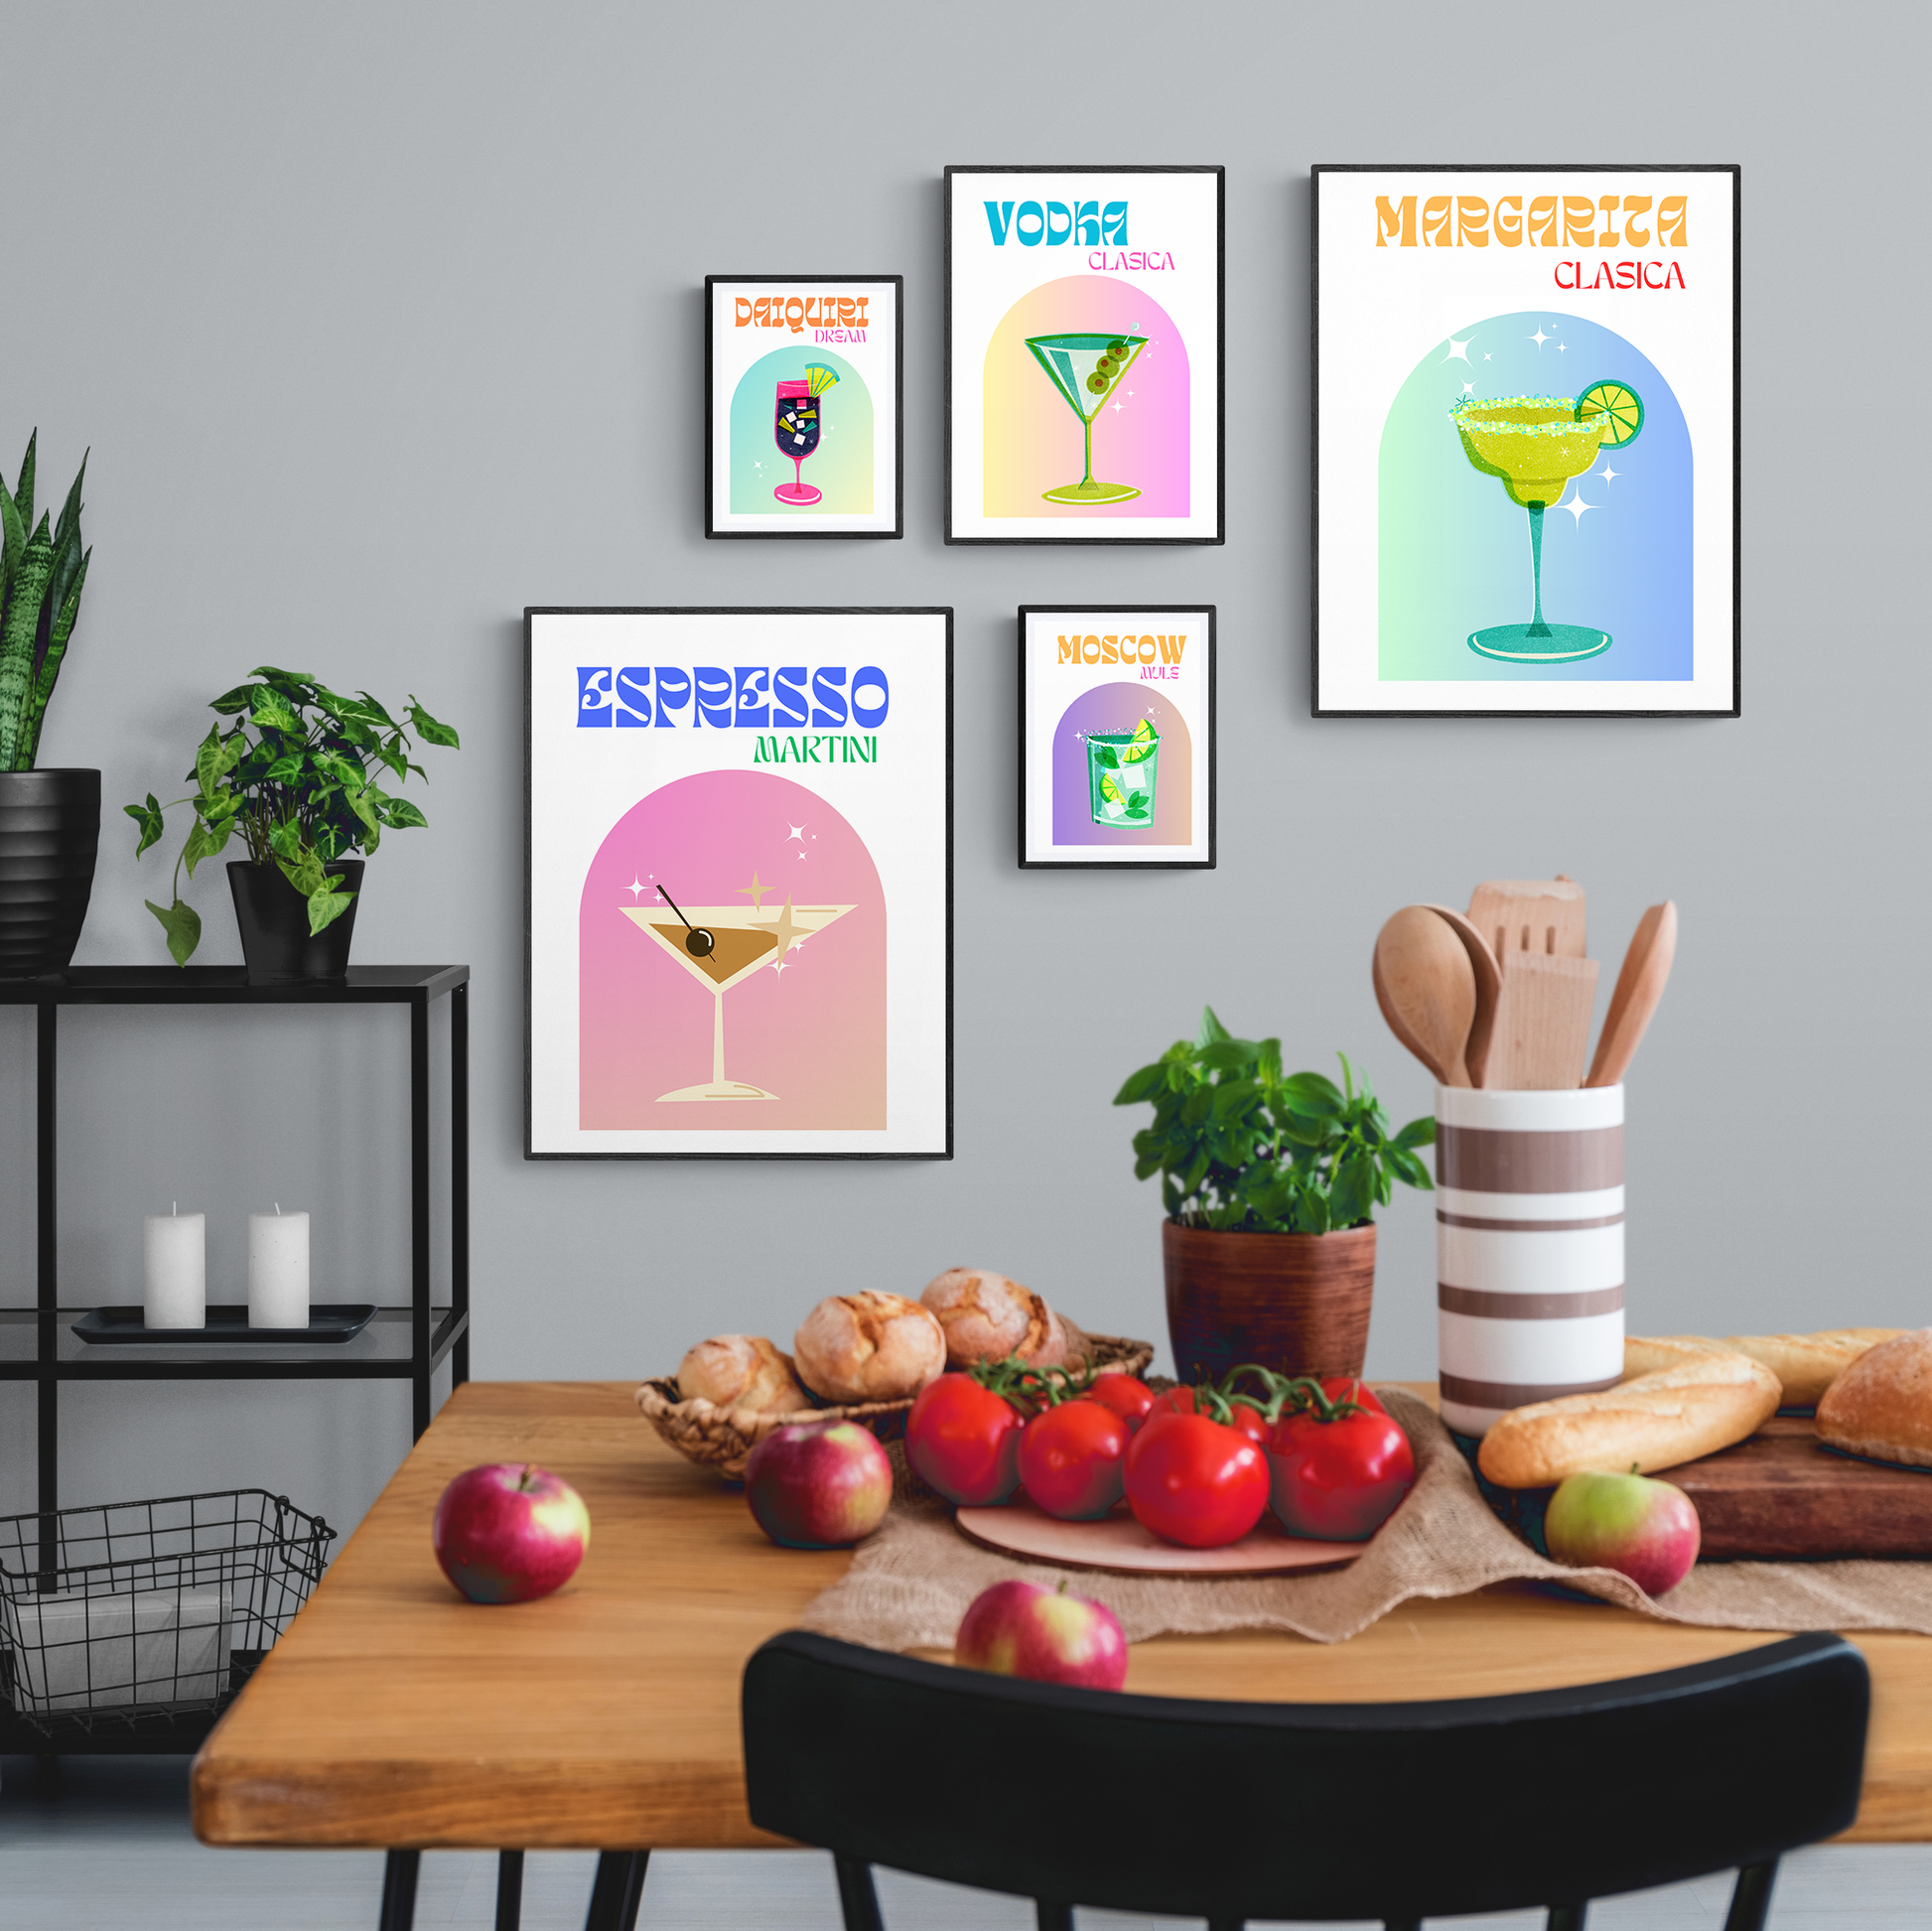 This CUBA LIBRE COCKTAIL PRINT features artwork of various cocktails, boasting vibrant colors and detailed illustrations of different recipes. Enjoy added flair for your walls with this wall décor and unique touch to your home. Whether you're looking for a decorative piece or ideas to spruce up your walls, this cocktail print delivers a great balance of style and visual appeal.